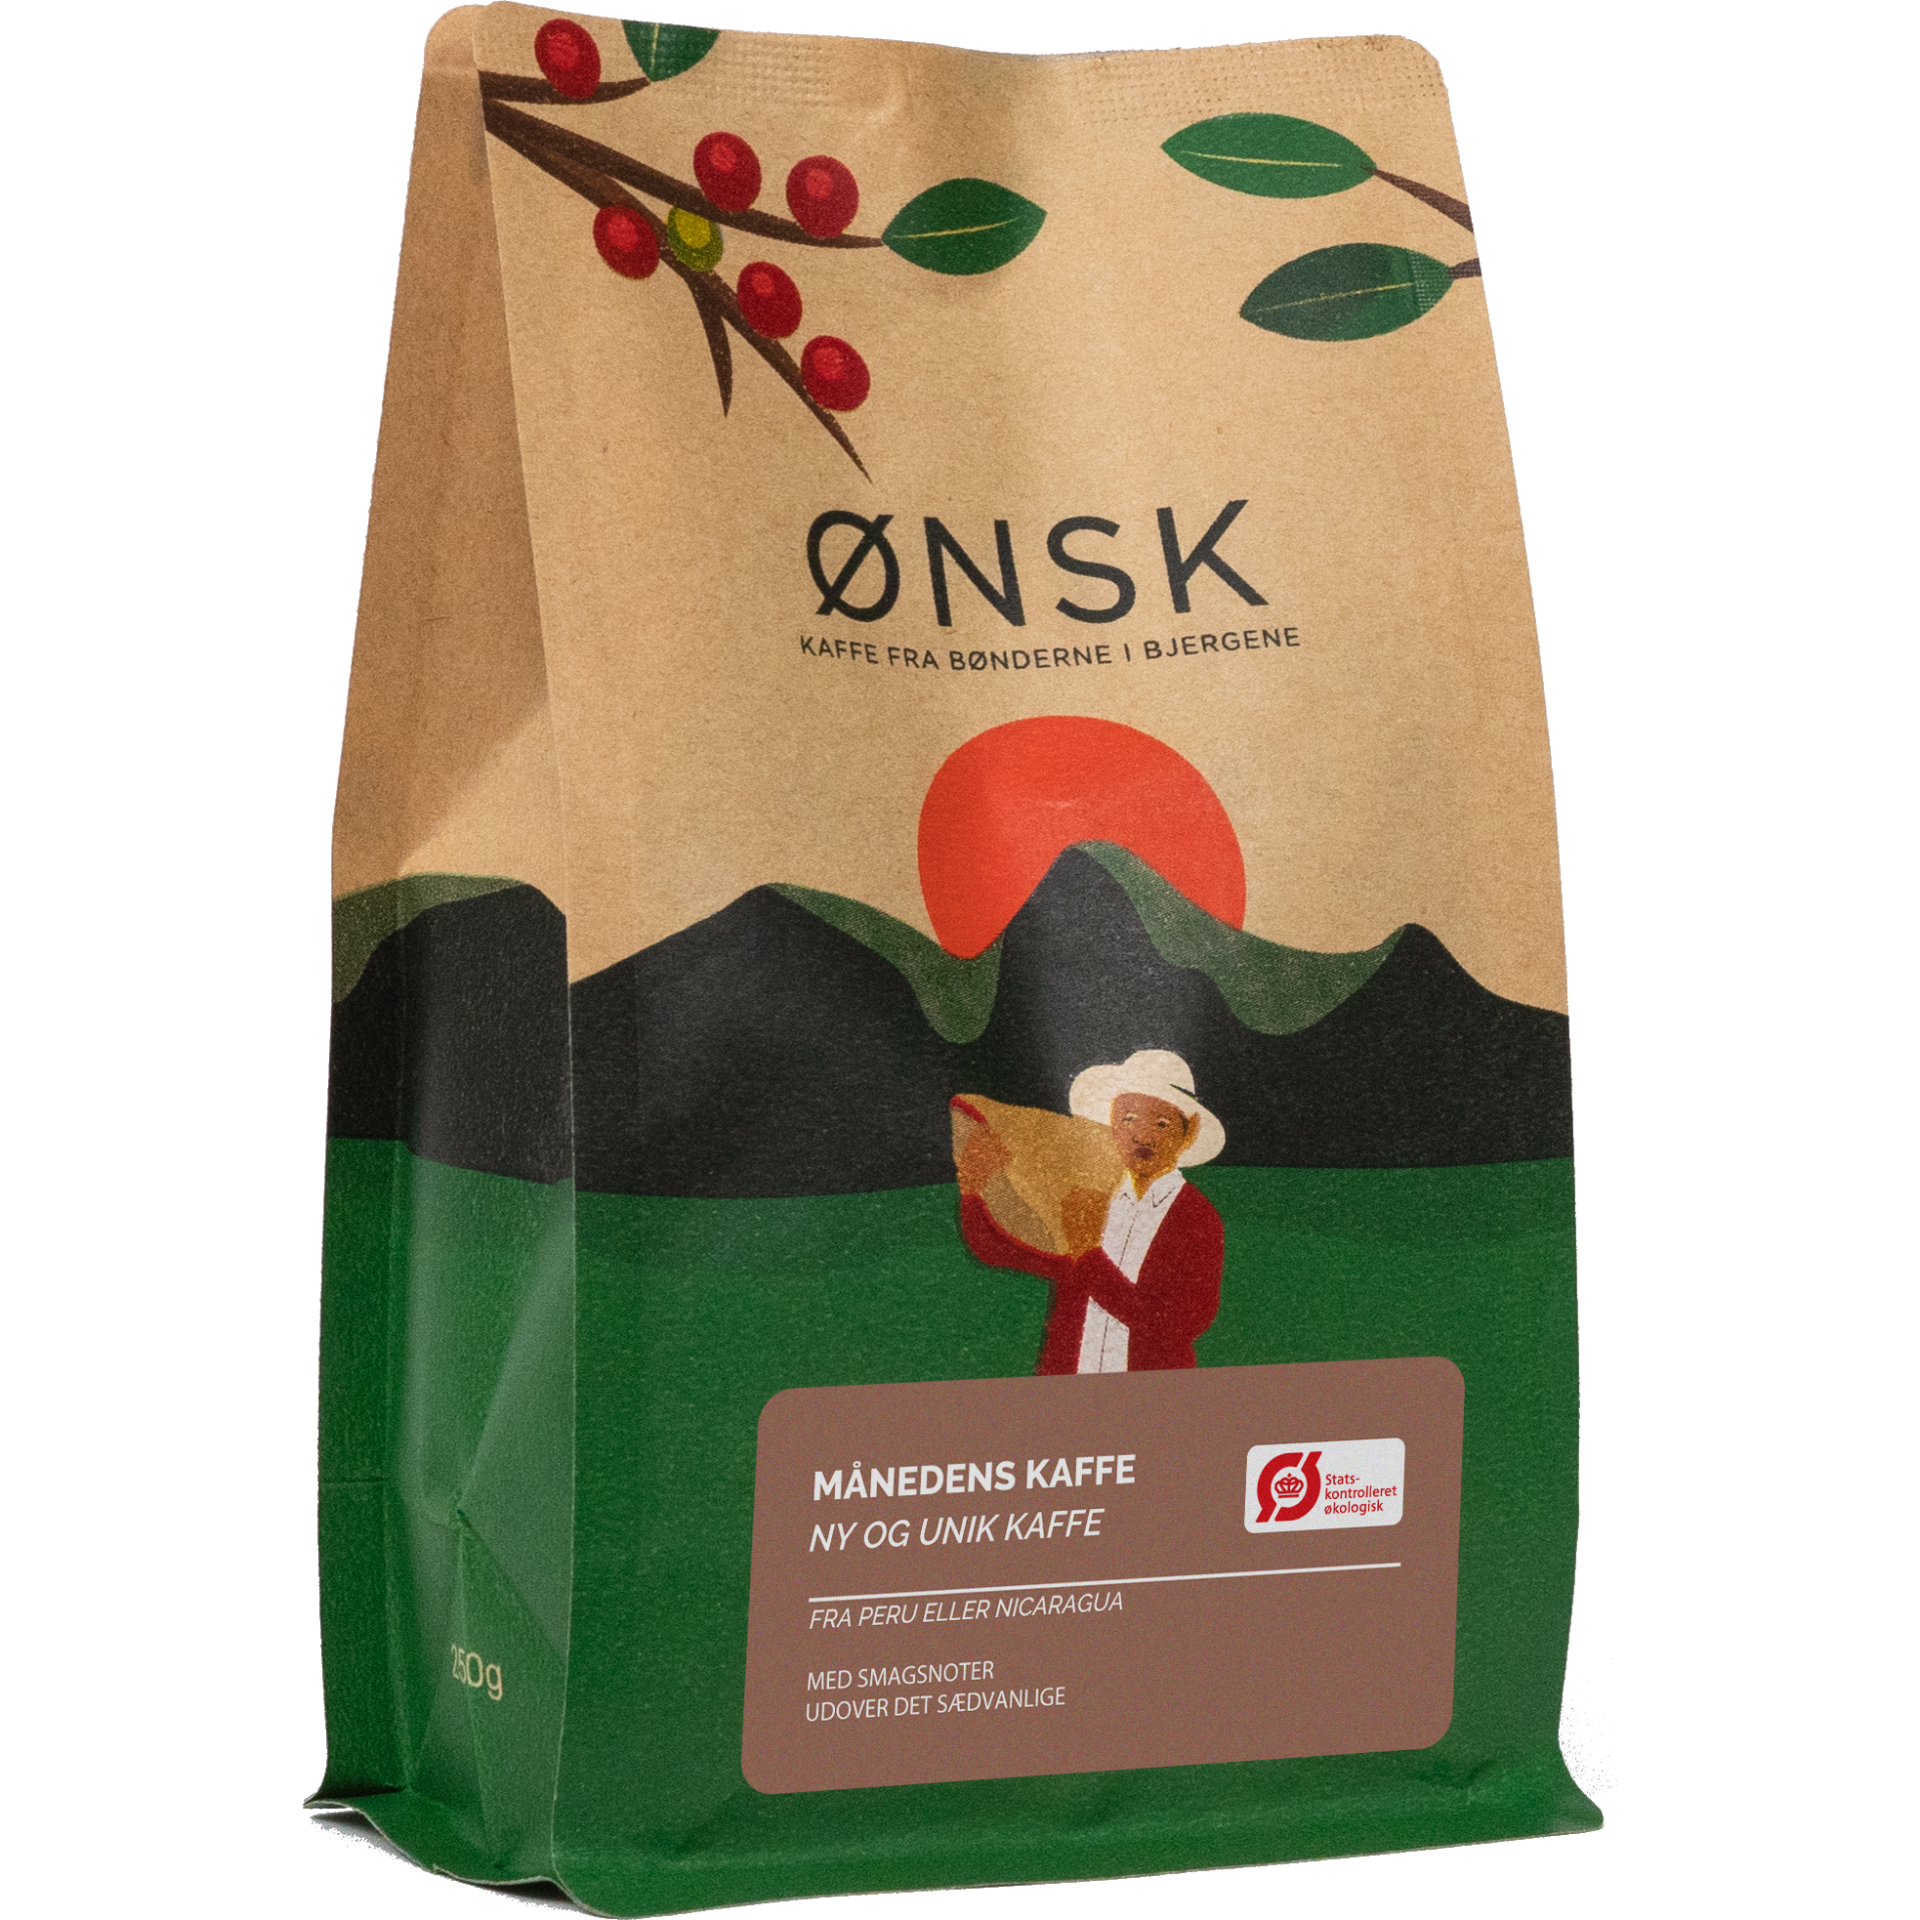 Organic specialty coffee from ØNSK